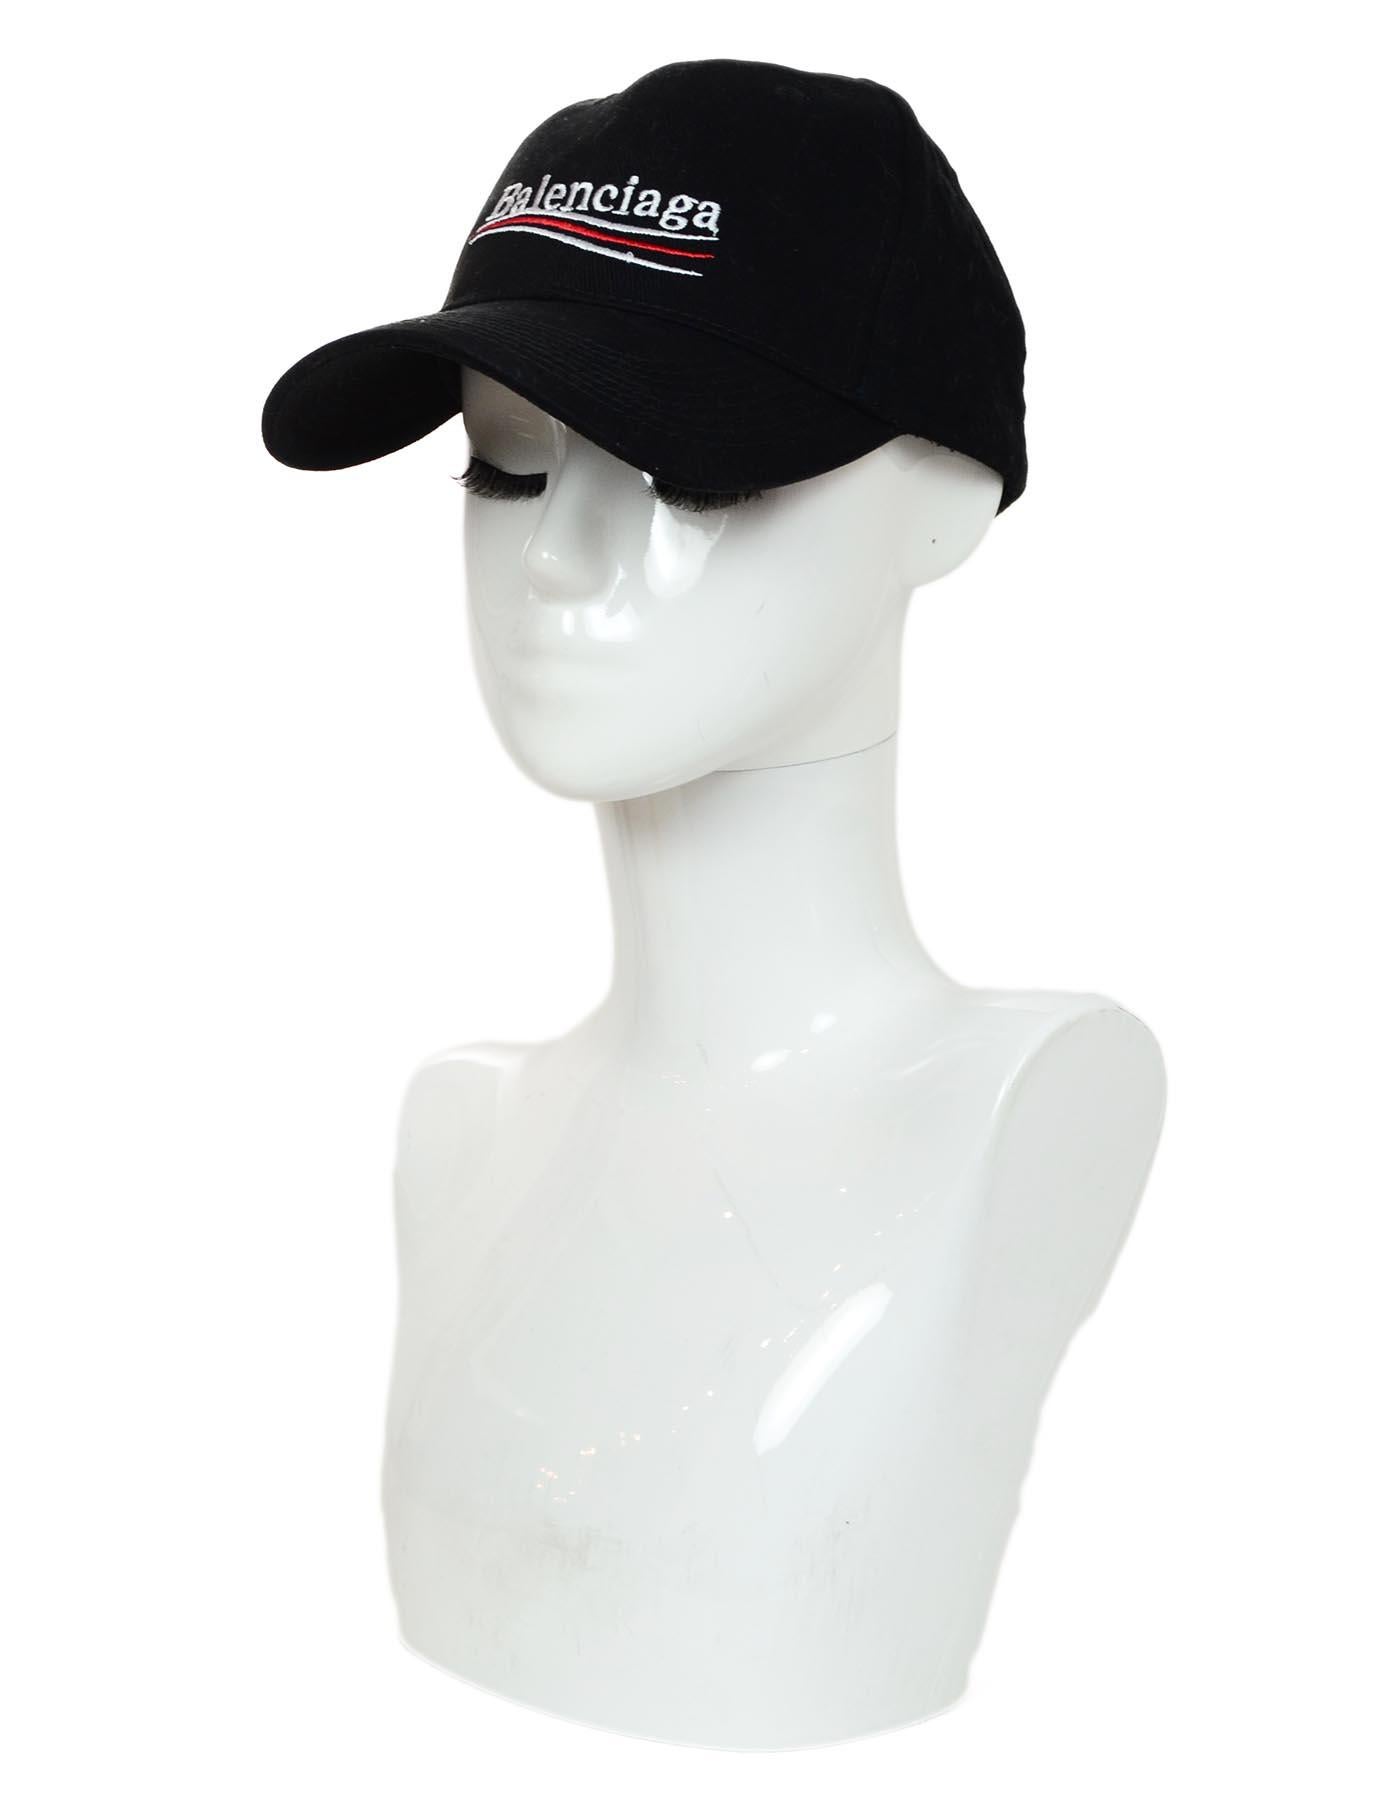 Balenciaga Black New Politic Logo Cap Sz L Unisex W/ Downturn Brim, Paneled Crown, & Velcro Strap Back Sz L

Made In: China
Color: Black, white, red
Materials: 100% cotton
Closure/Opening: Adjustable back tab with velcro closure
Overall Condition: